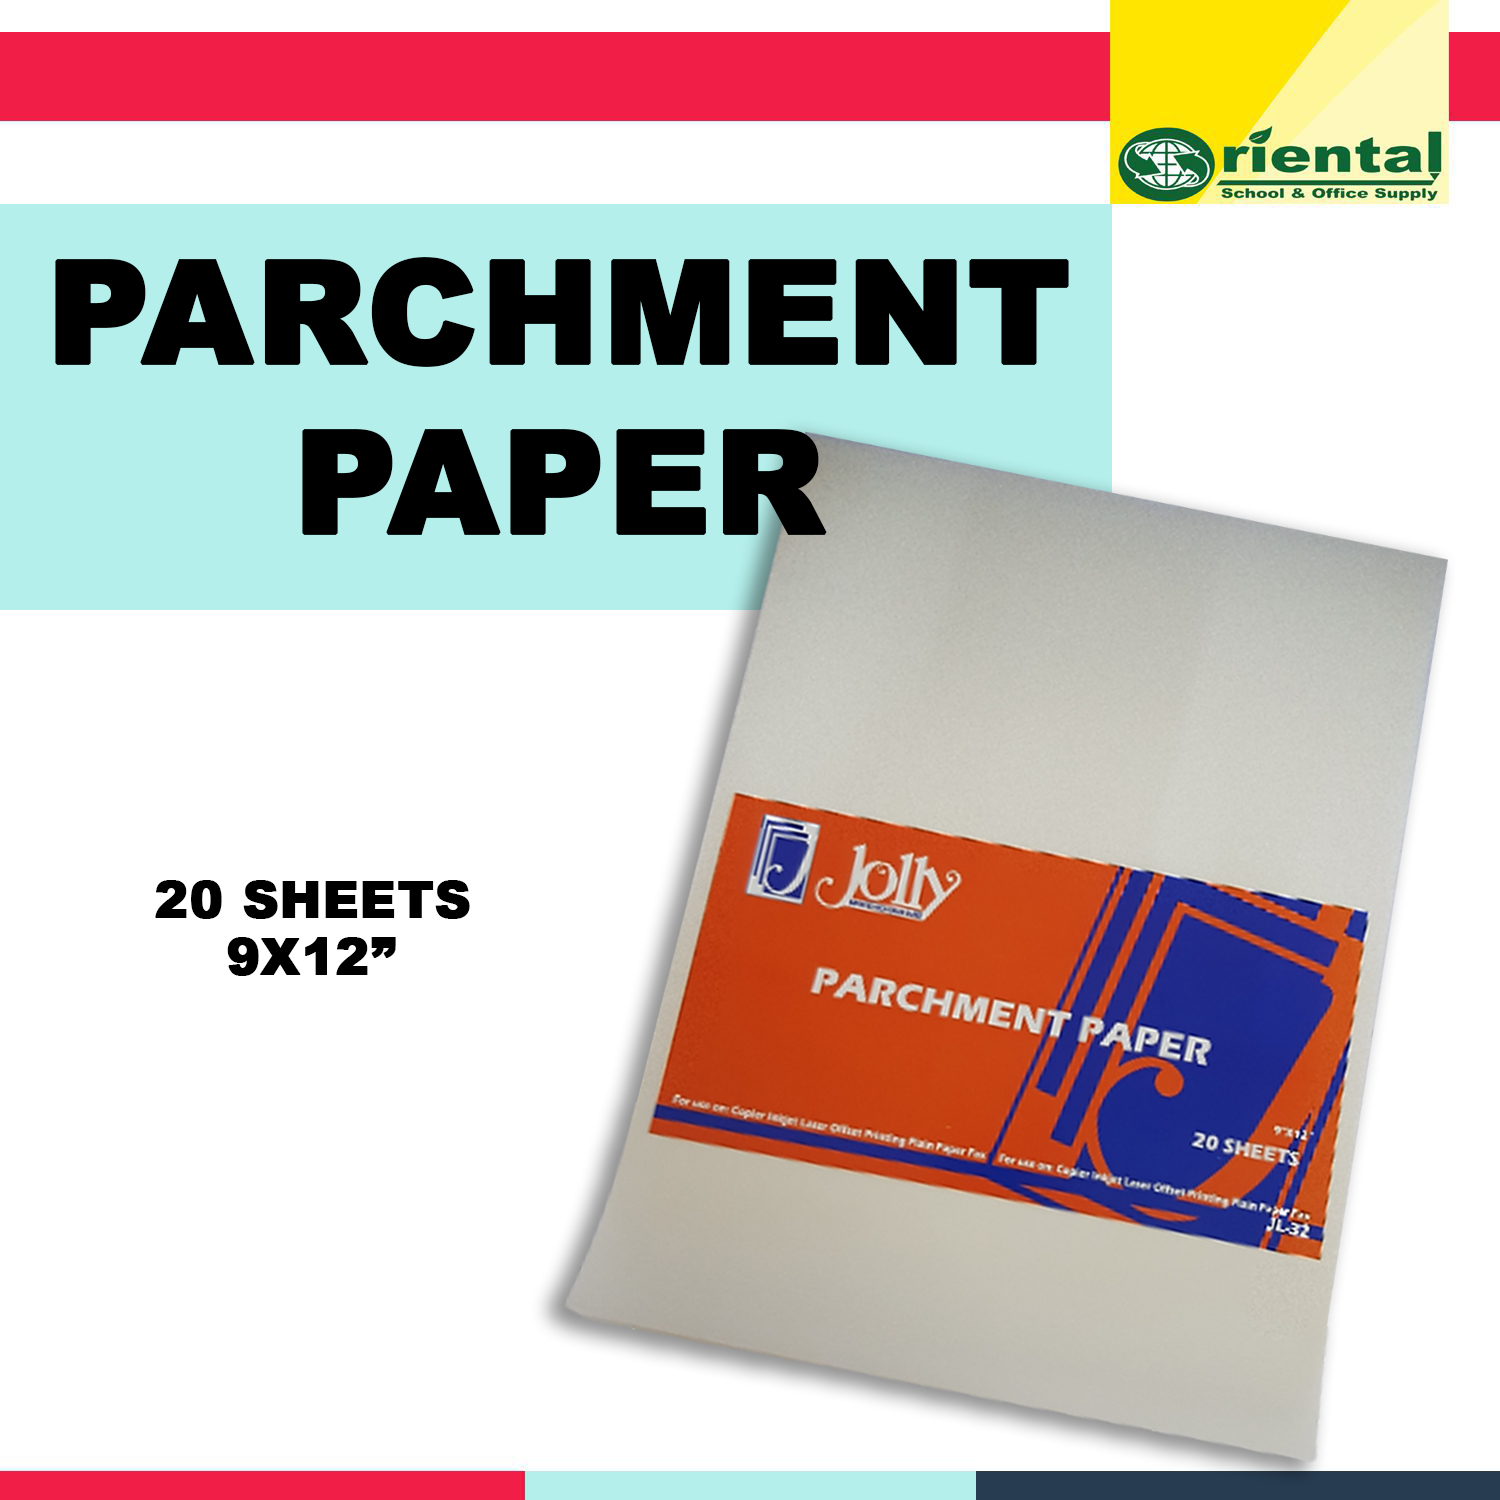 Printable Parchment Paper A4 size 70gsm for Diplomas, Certificates, Awards,  Invitations, Resumes